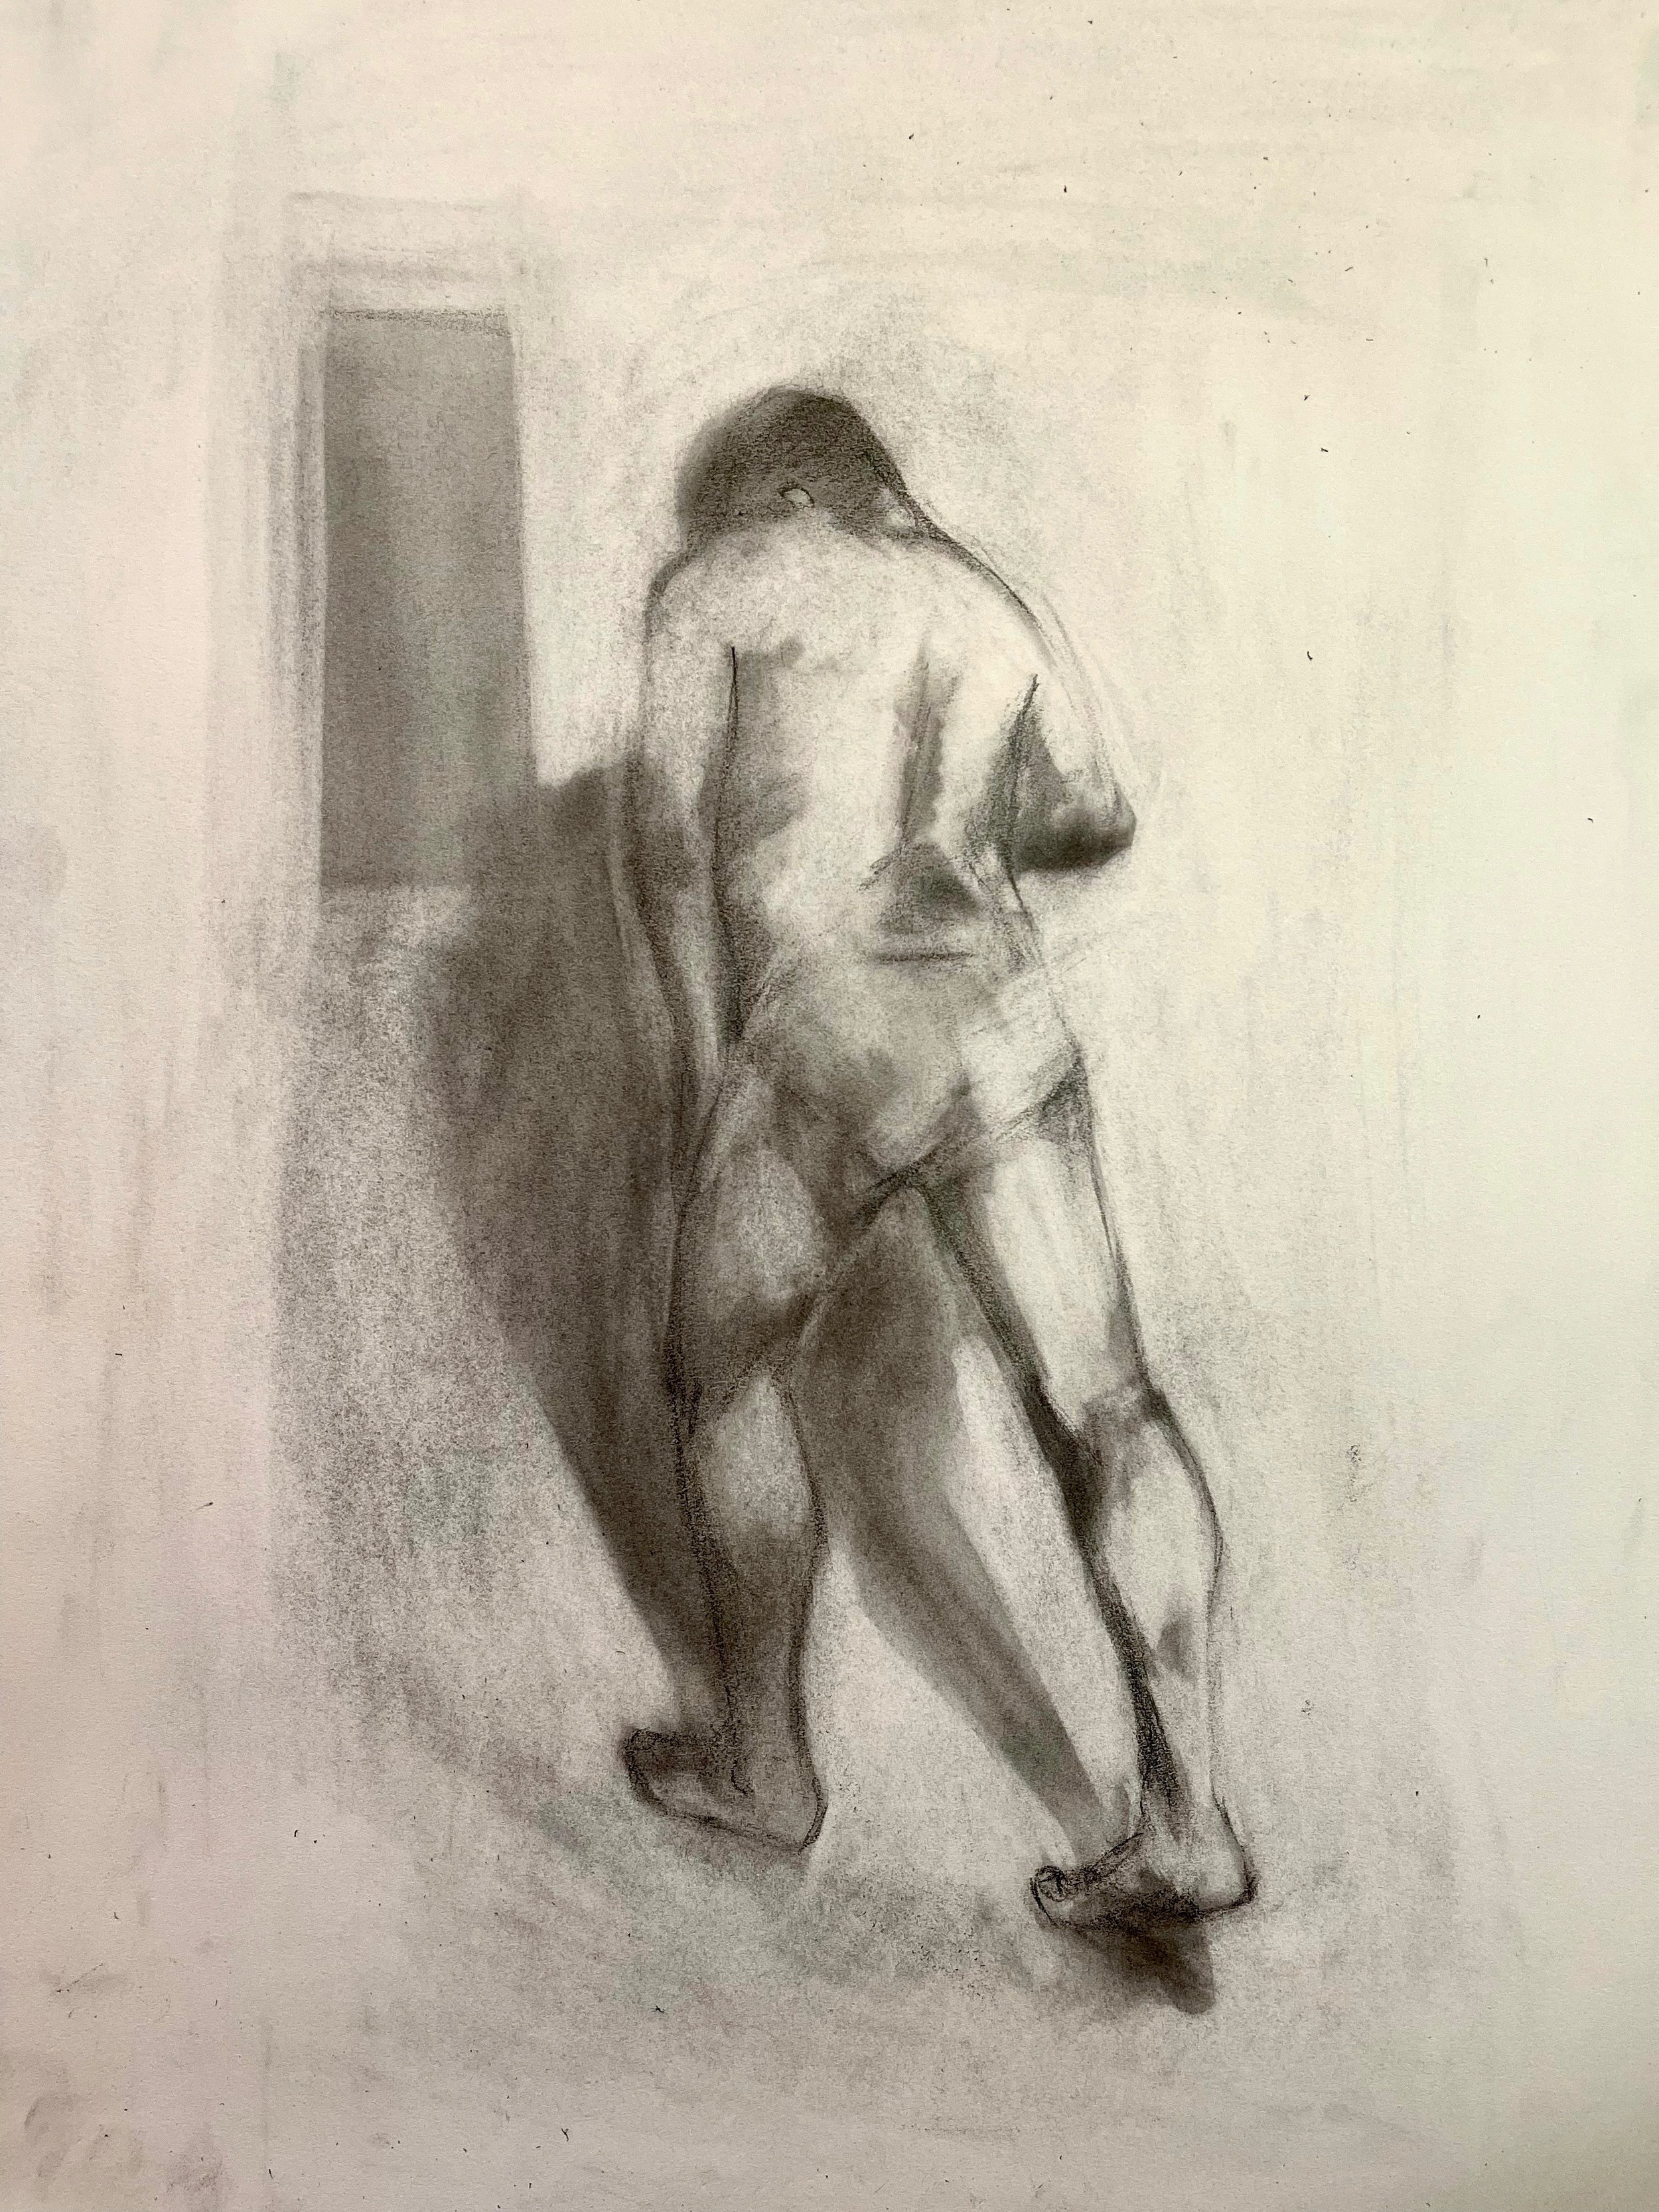 Online Figure Drawing with Narelle Sissons - Carnegie Mellon